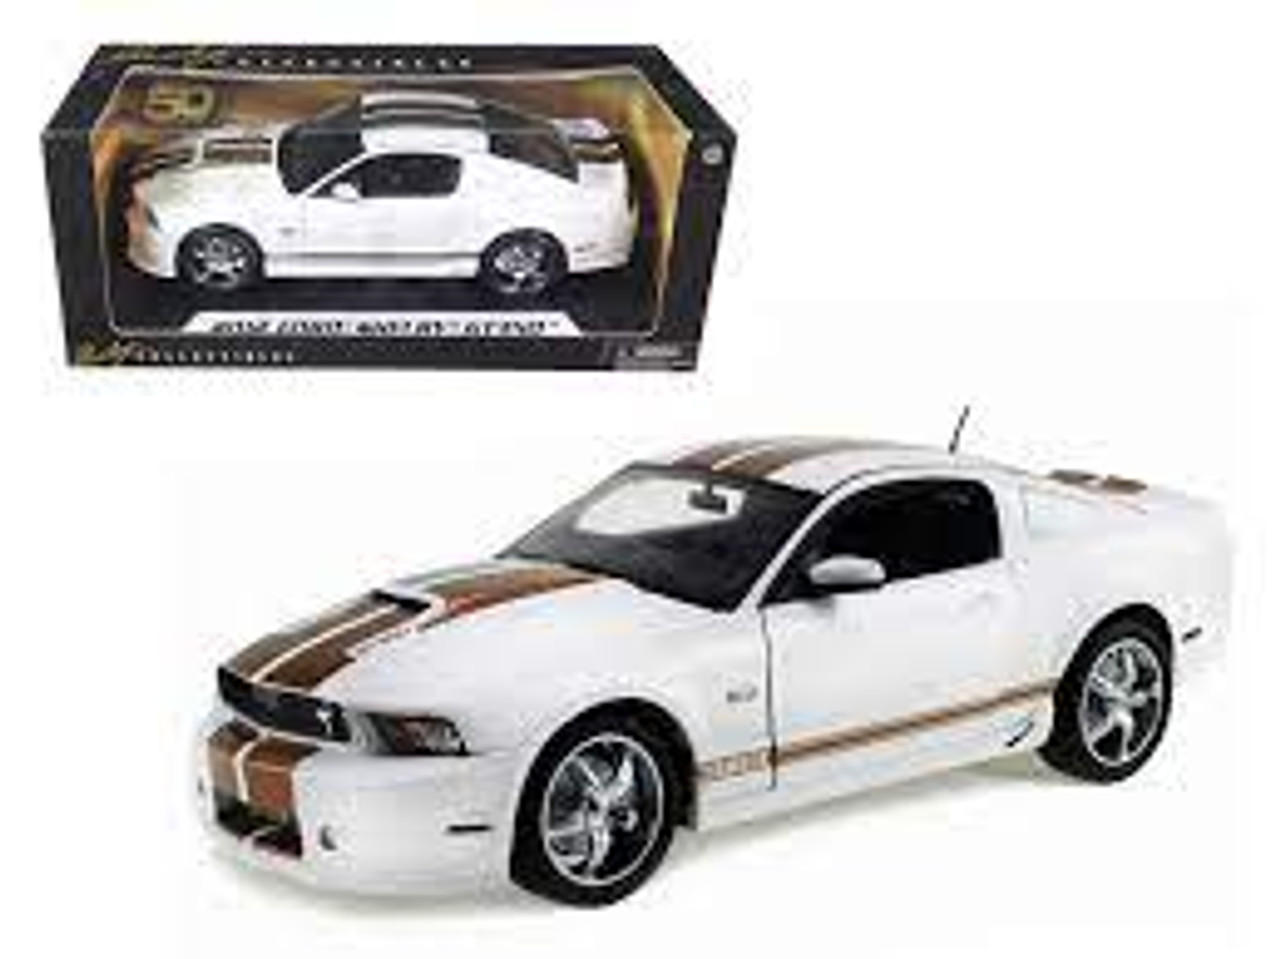 1/18 Shelby Collectibles 2012 Ford Shelby GT350 (White with Gold Stripes) Diecast Car Model